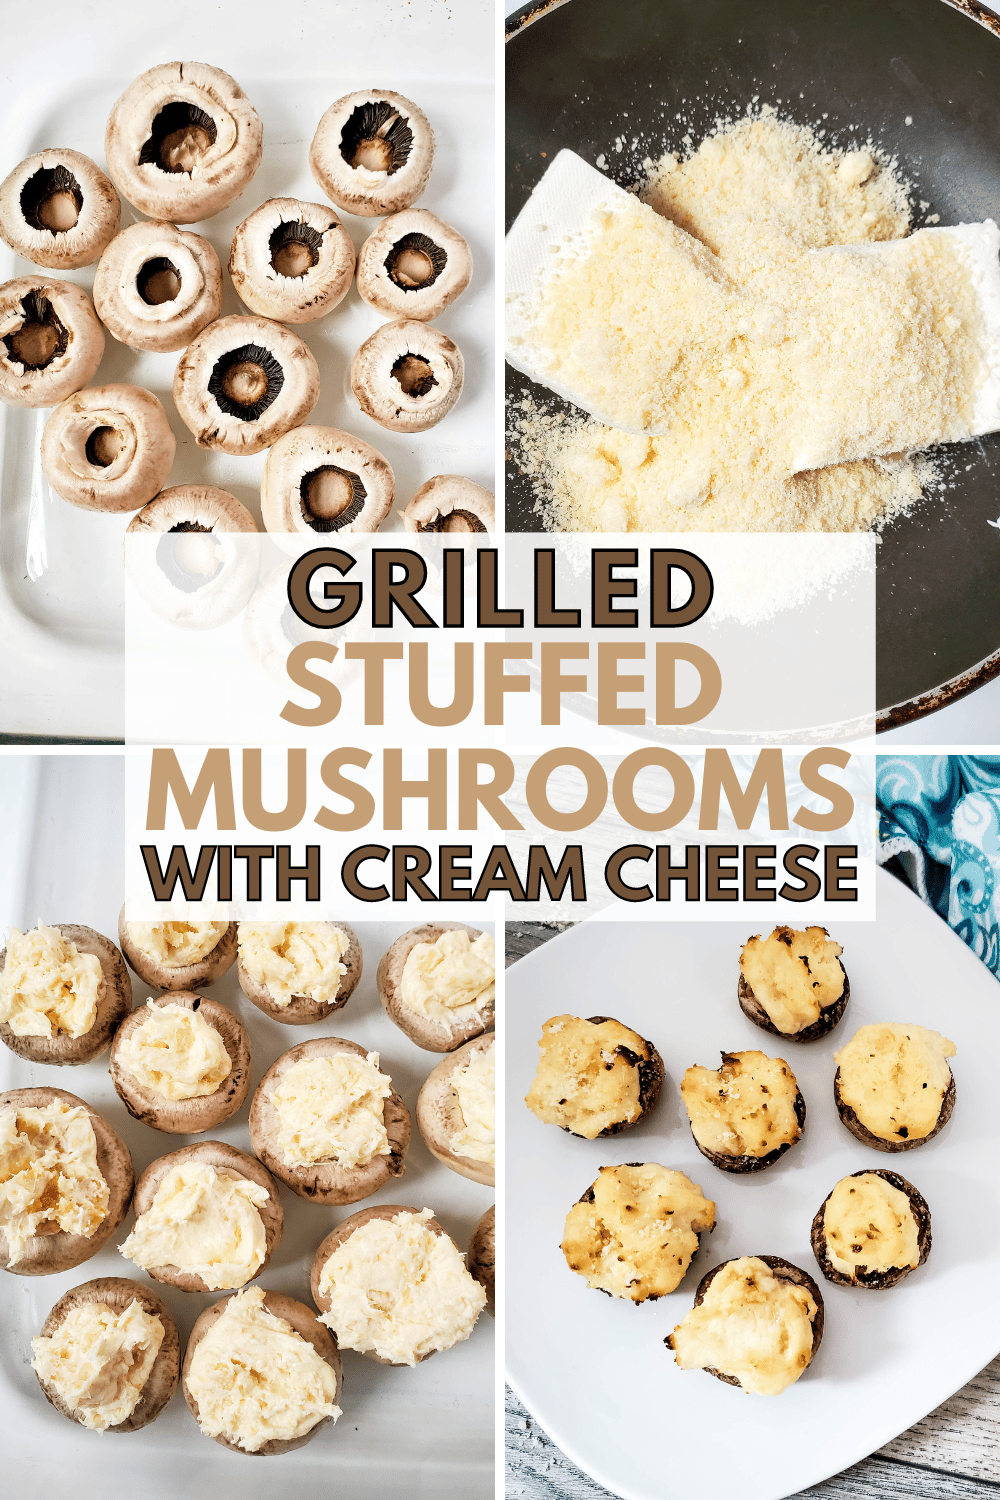 These Grilled Stuffed Mushrooms with Cream Cheese are the perfect appetizer for your next party! They’re easy to make and full of flavor. #grilledstuffedmushrooms #stuffedmushrooms #creamcheese #appetizer #recipe via @wondermomwannab